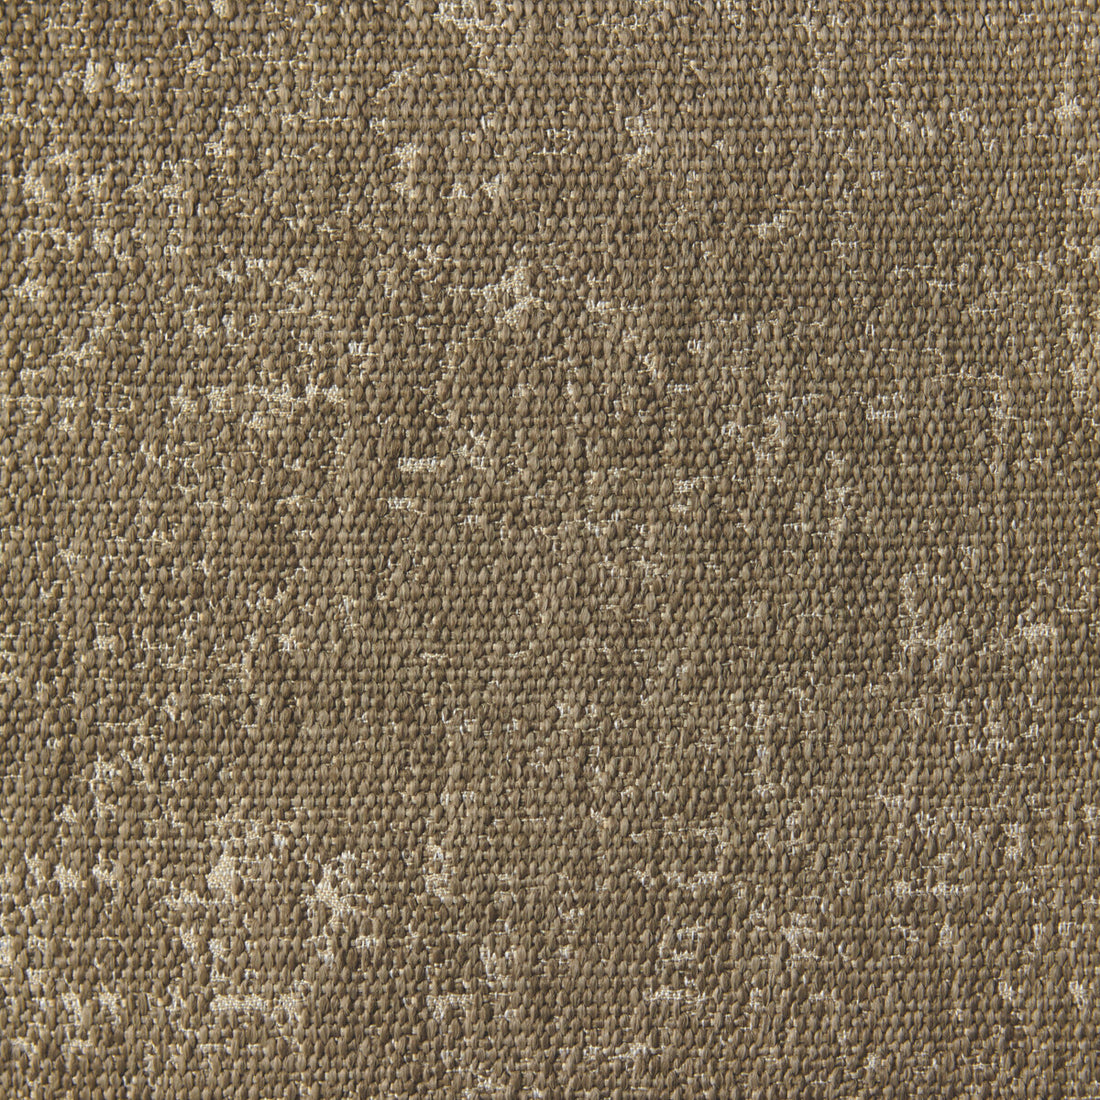 Suquet fabric in 1 color - pattern LZ-30401.01.0 - by Kravet Design in the Lizzo Indoor/Outdoor collection